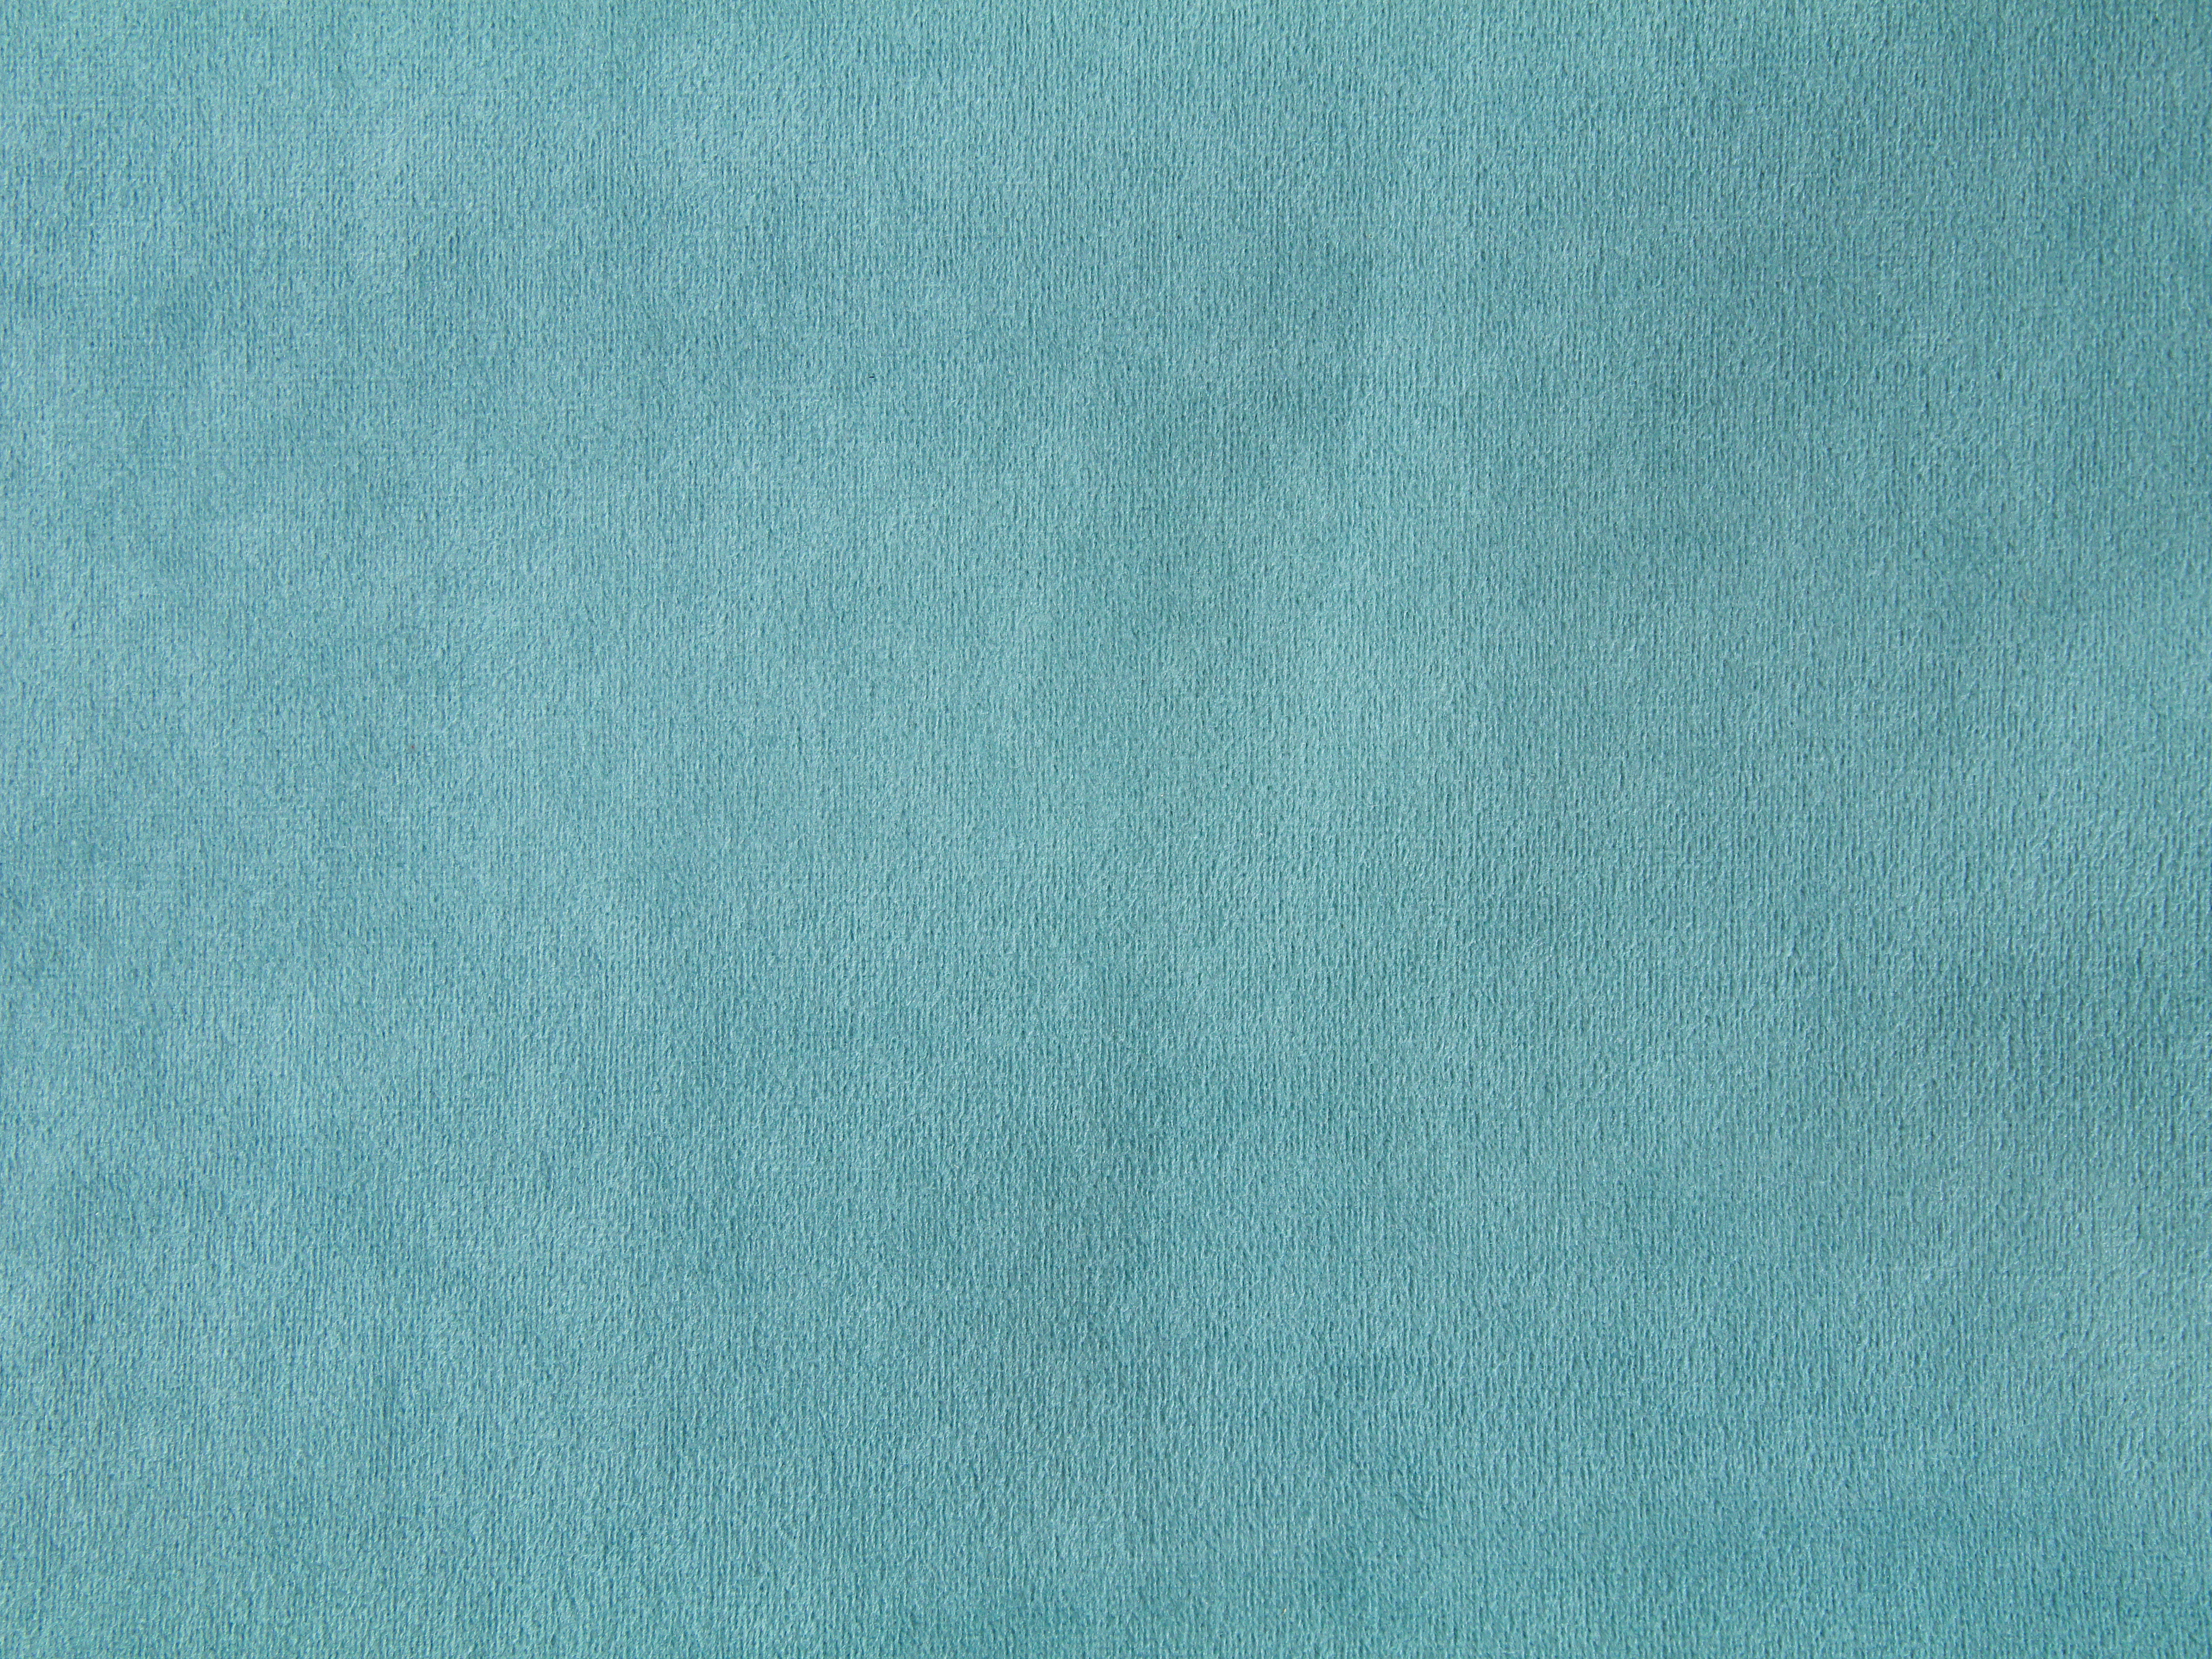 Teal Fabric Texture Soft Fuzzy Suede Cloth Stock Wallpaper X